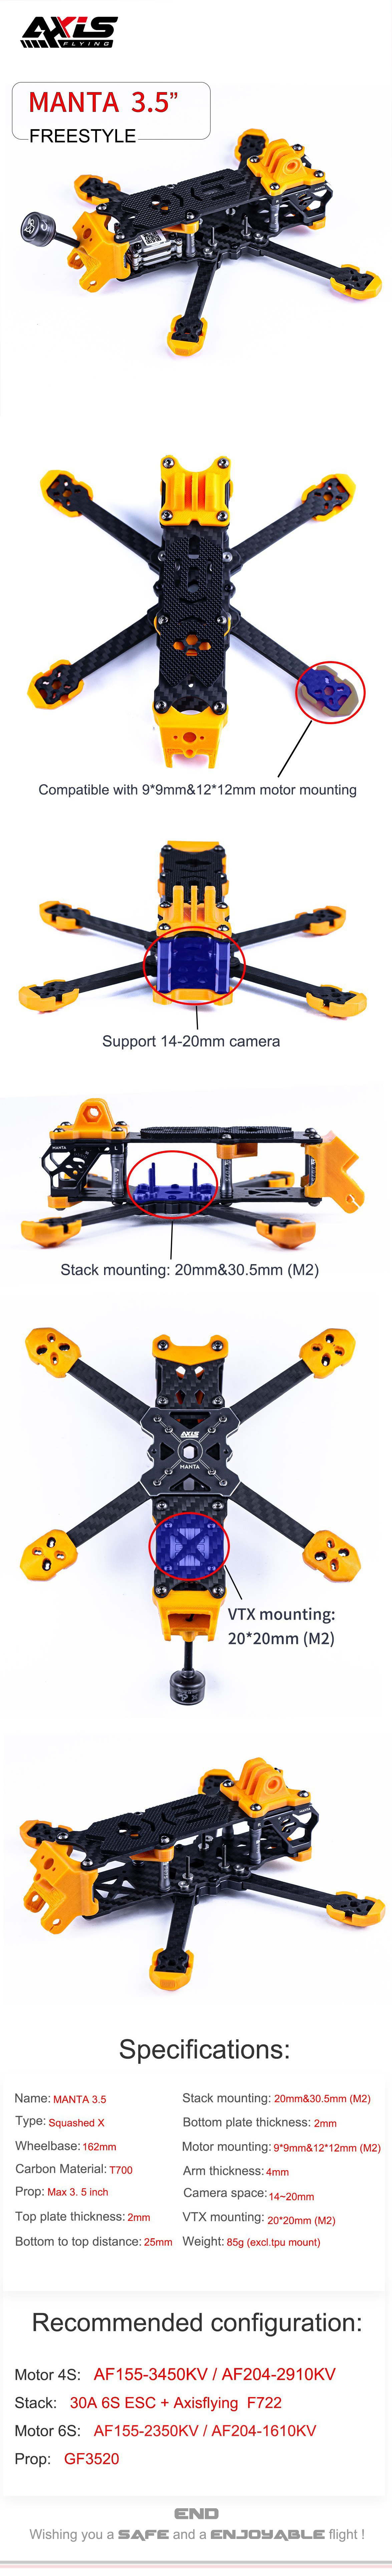 Axisflying MANTA3.5" / 3.5inch fpv freestyle training frame kit 3.5" frame kit cinematic drone,cinewhoop drone,longrange drone,freestyle drone,fpv drone,fpv quads,3.5" cinematic drone,3.5" cinematic quads,3.5" cinewhoop quads,3.5inch freestyle